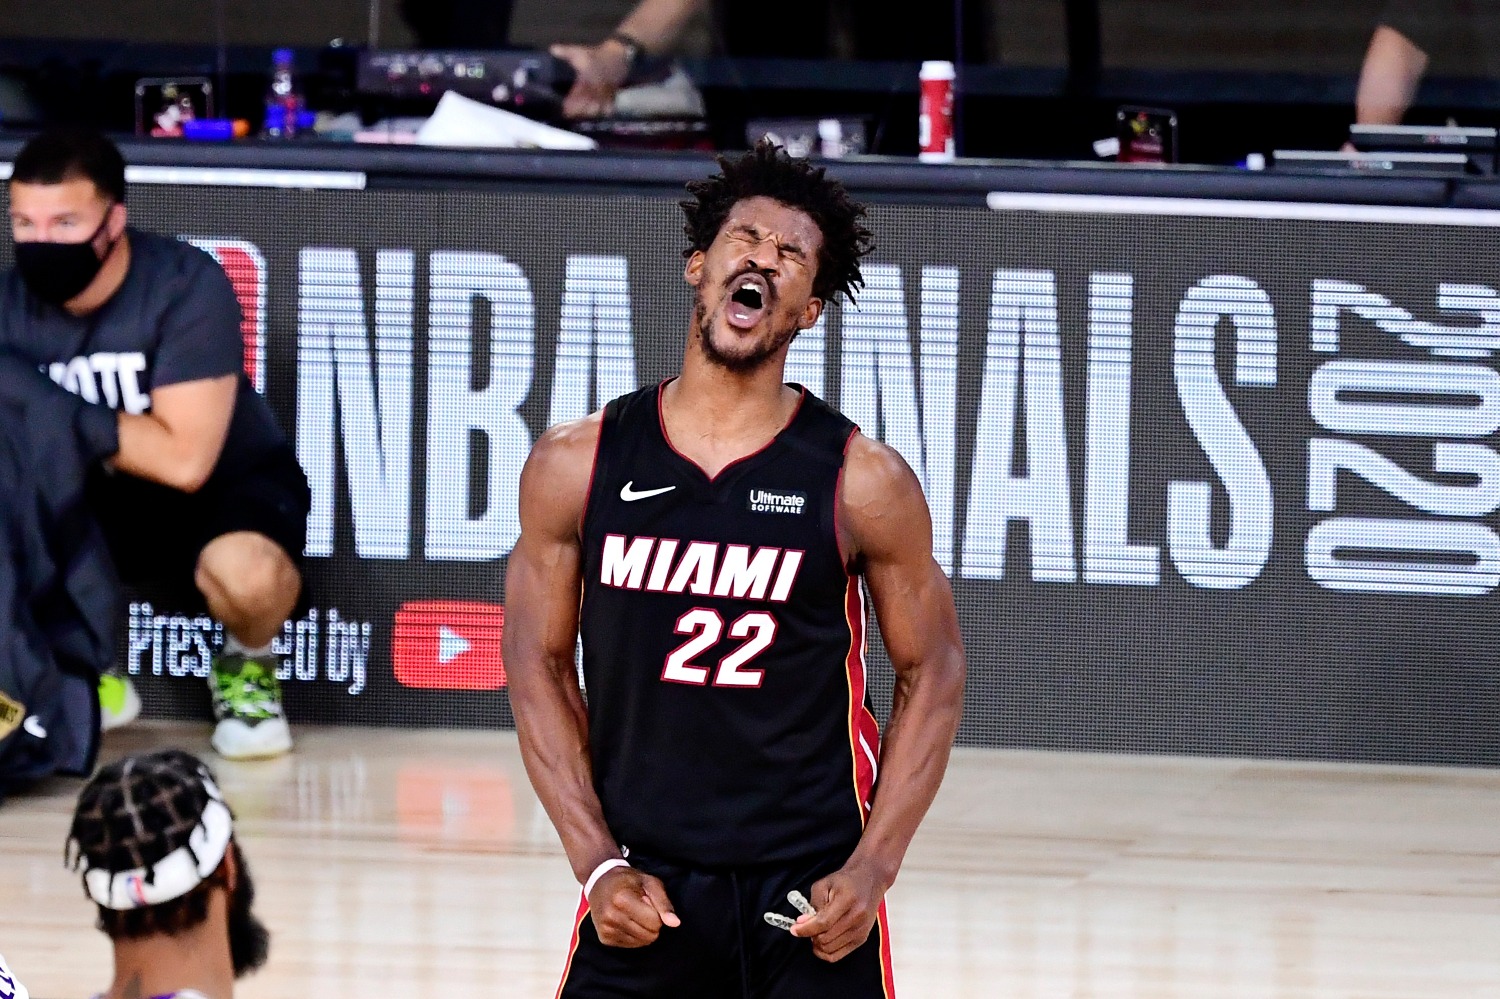 Jimmy Butler saved the Miami Heat from suffering a cruel NBA Finals fate with a sensational performance in Sunday's win against the Lakers.